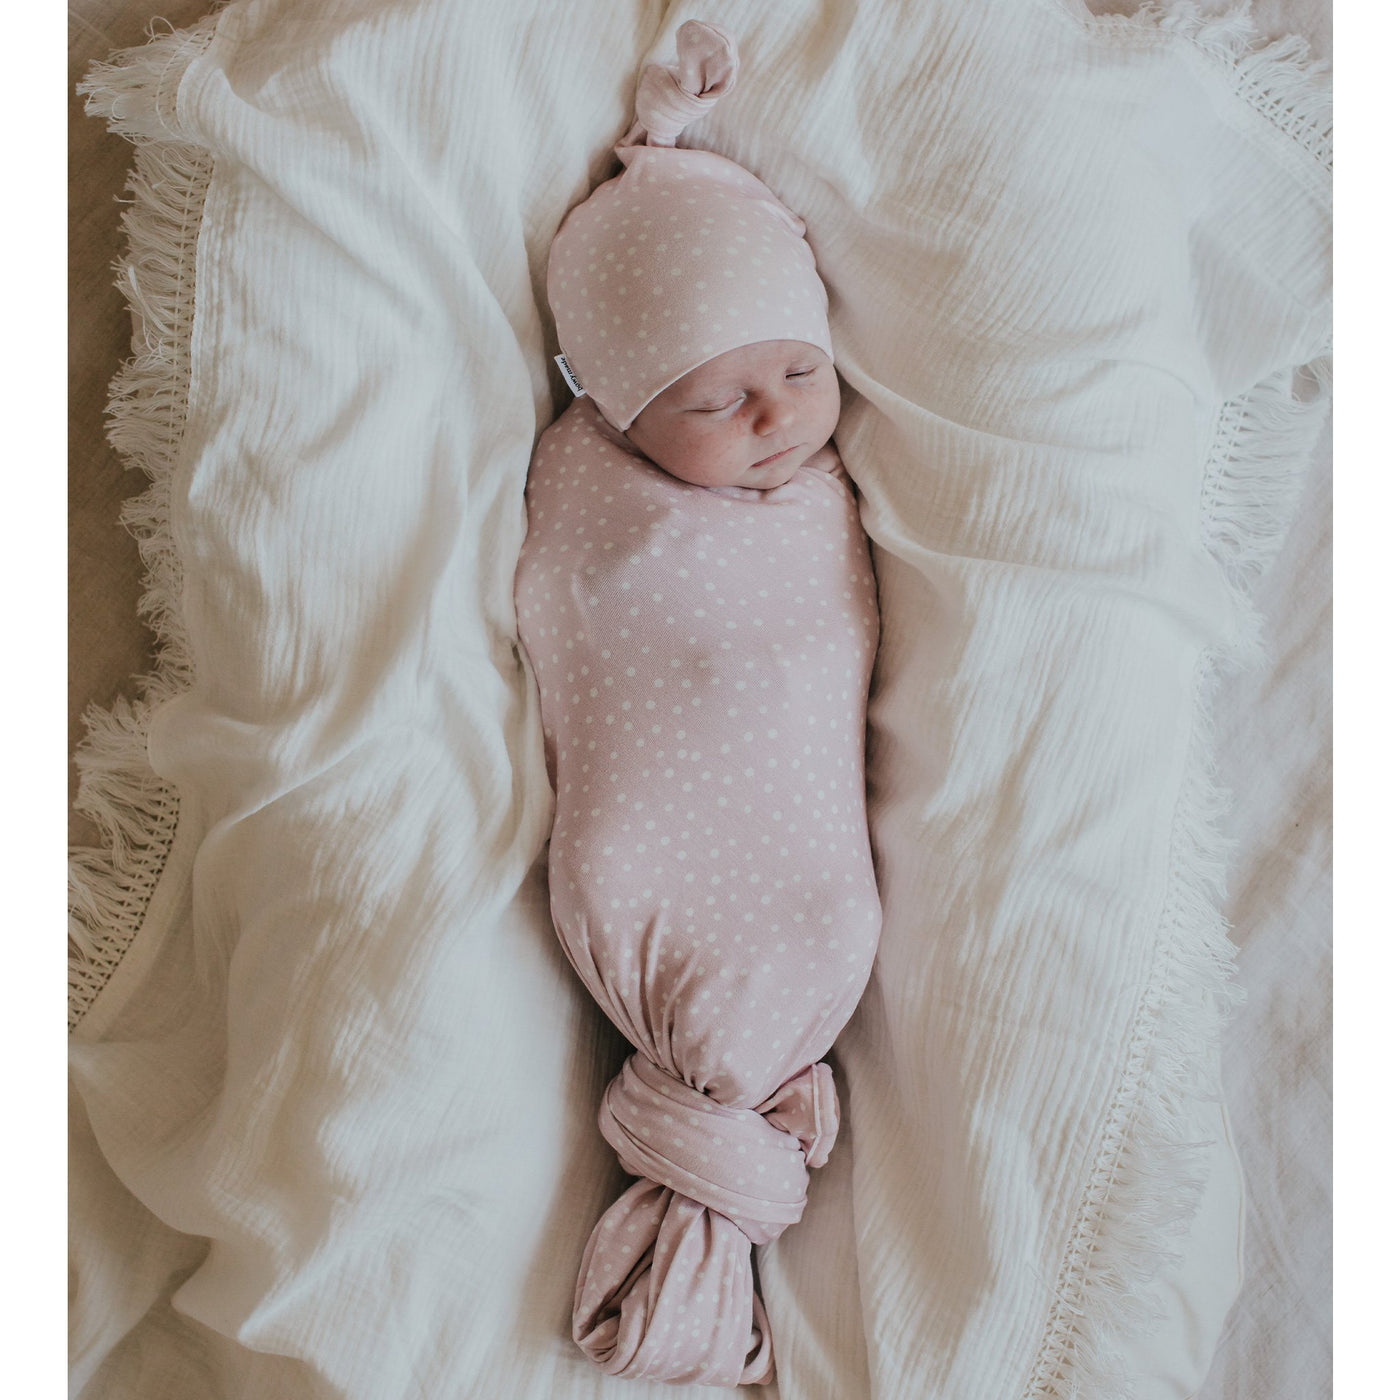 Cute newborn baby sleeping wearing matching pink dot swaddle and top knot beanie